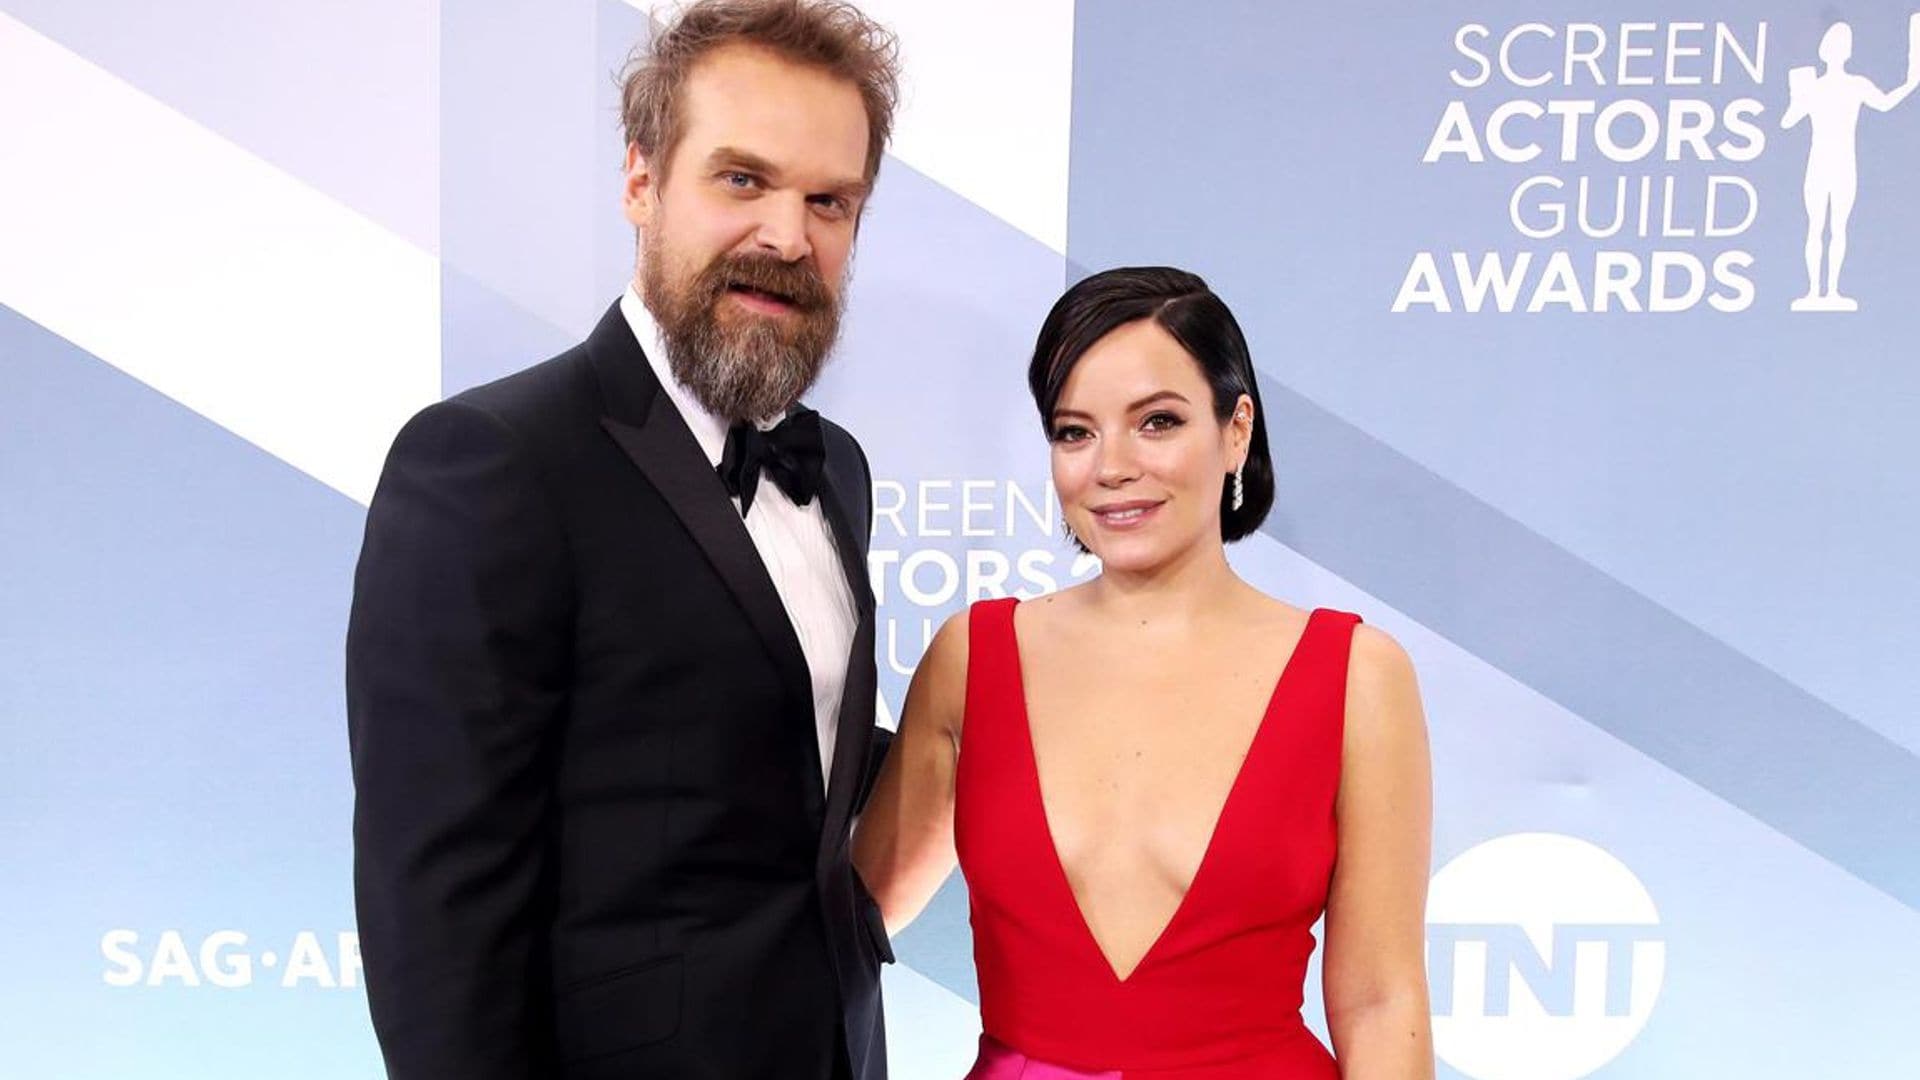 Lily Allen and David Harbour just got married